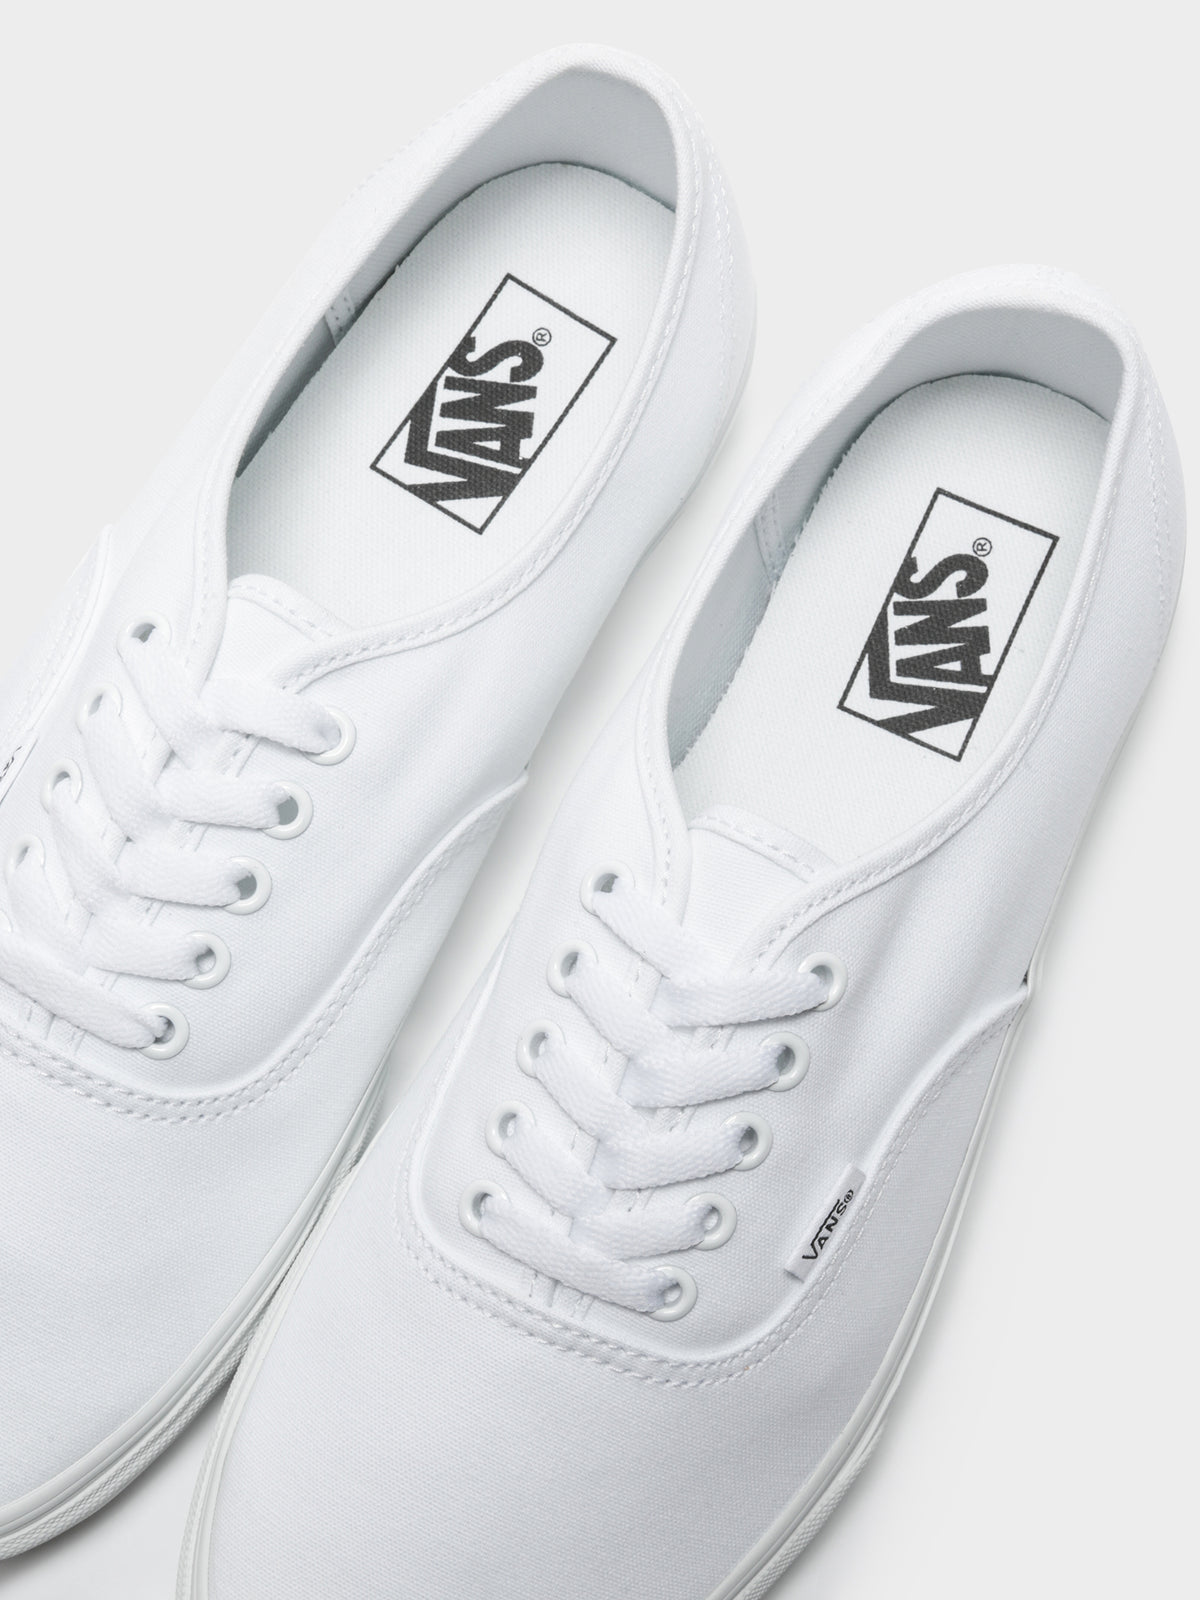 Unisex Authentic Sneakers in White